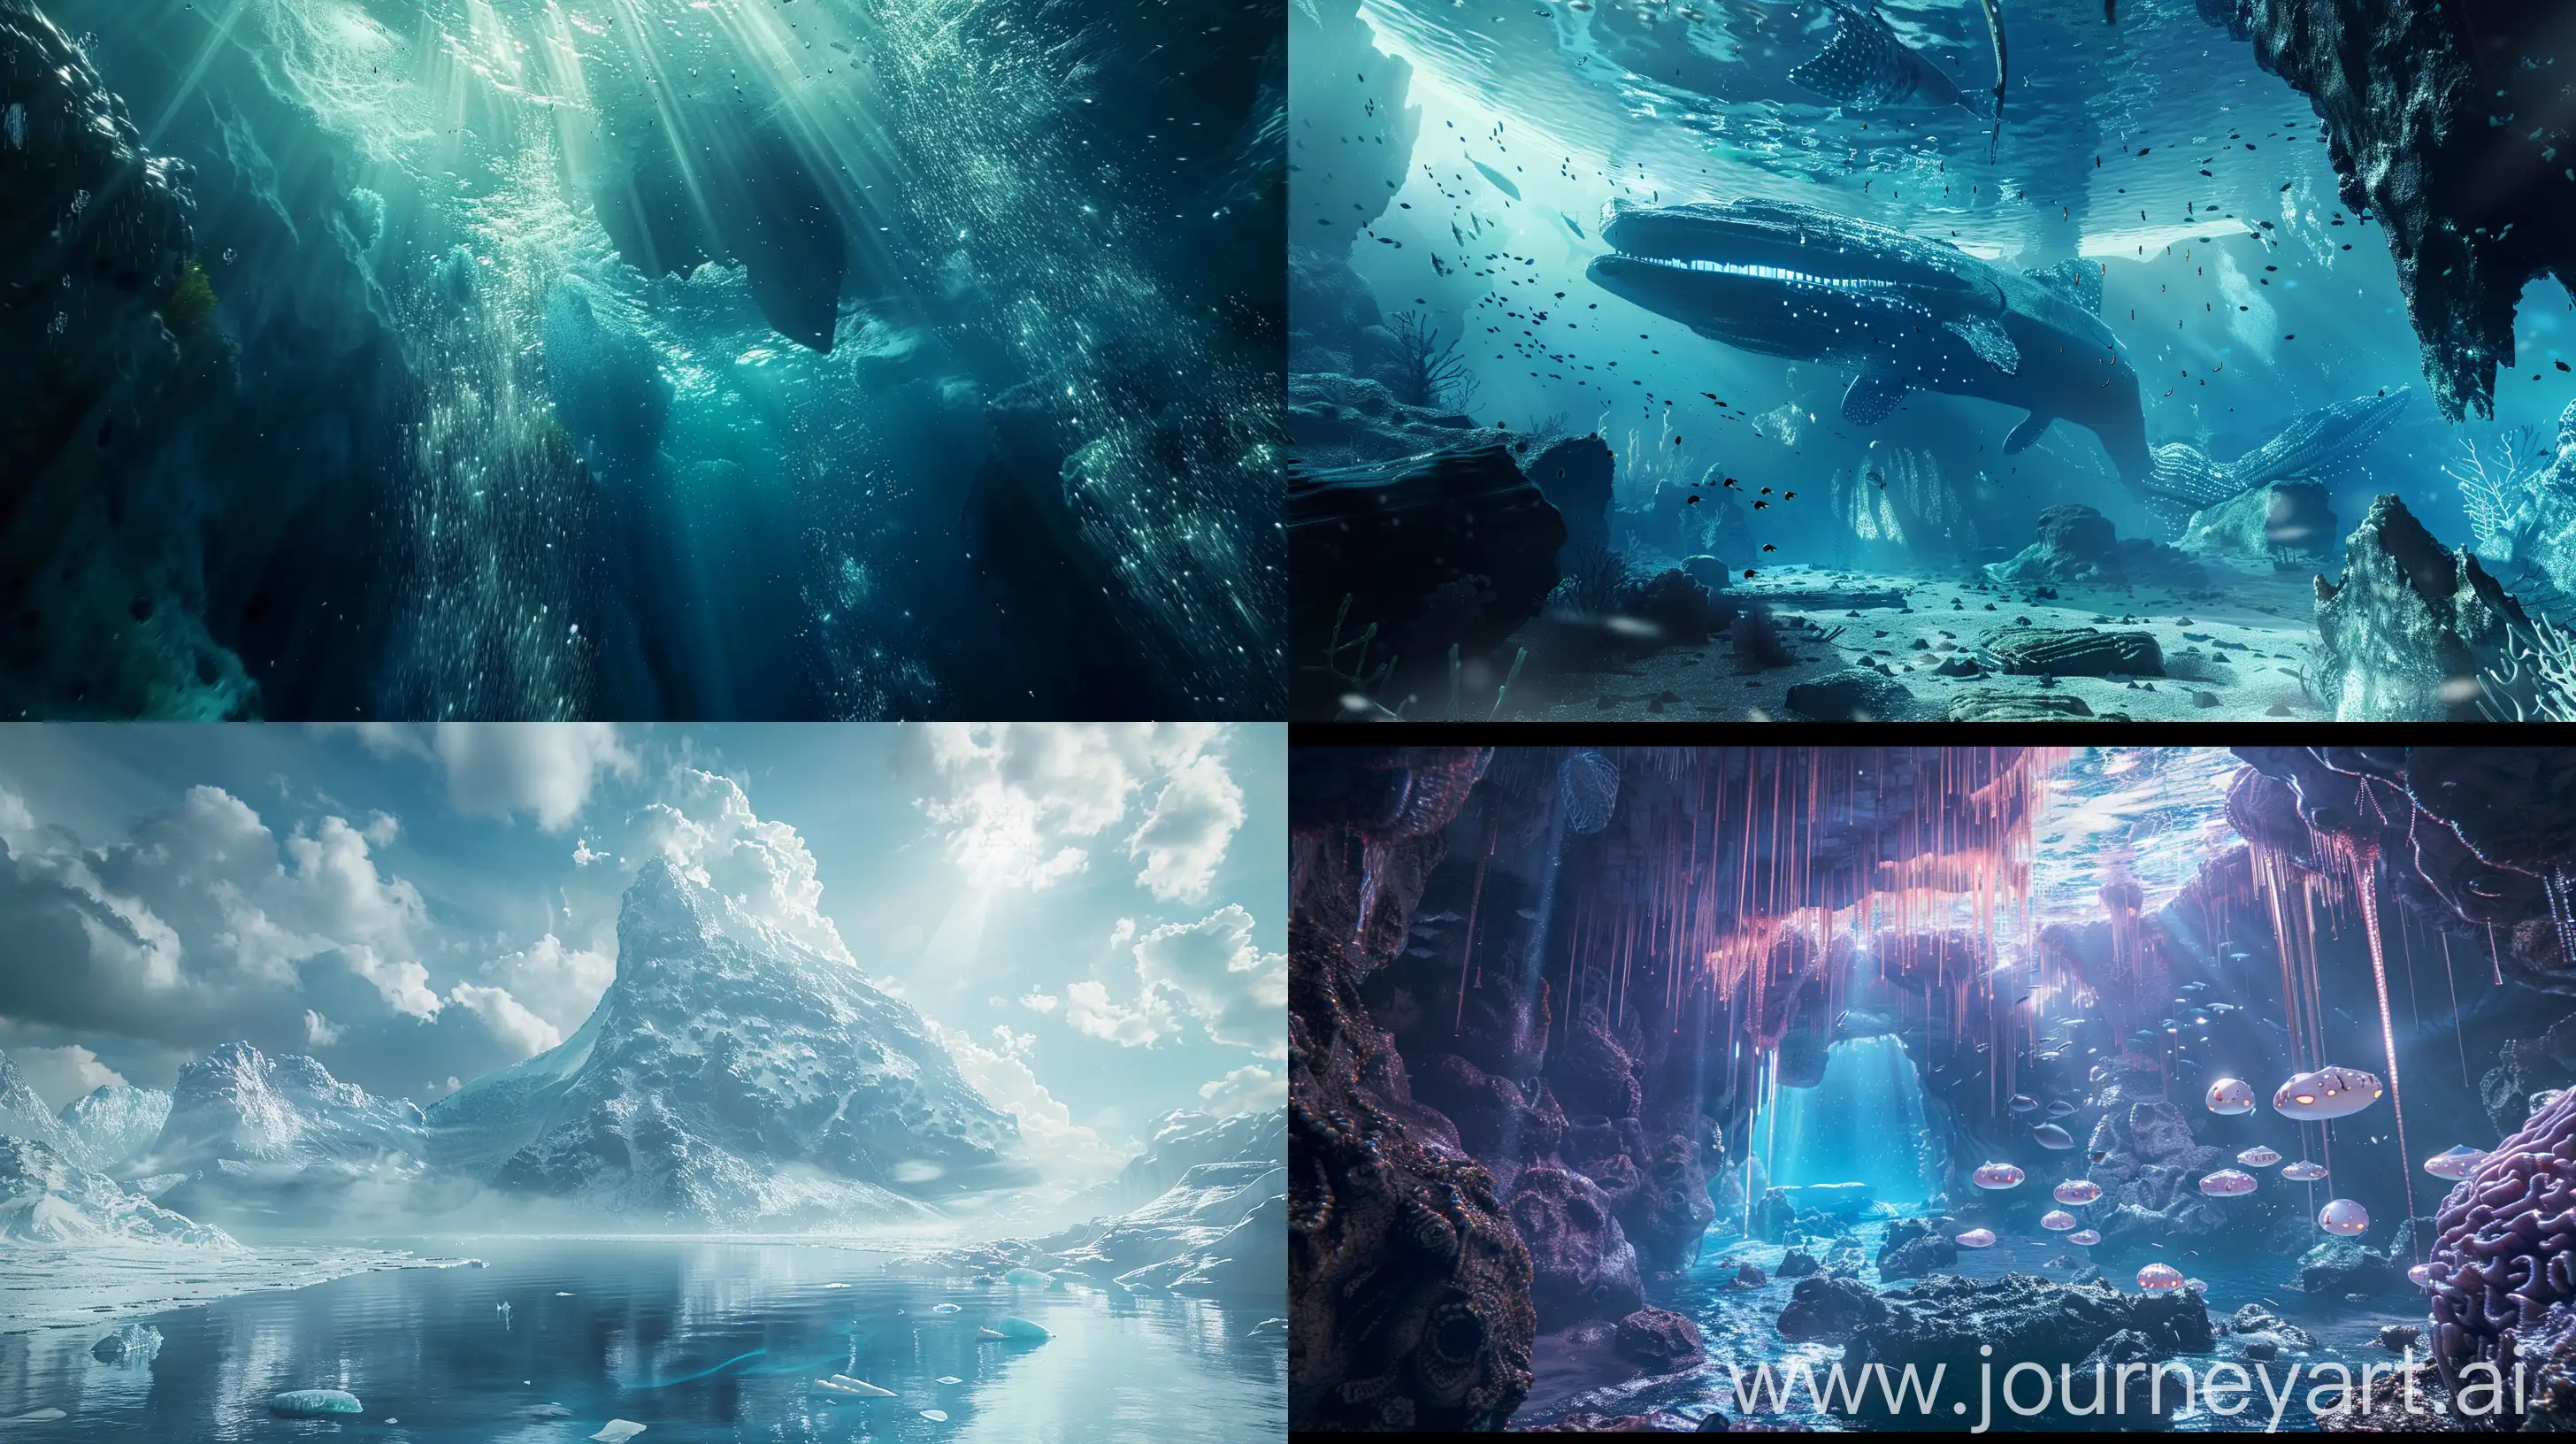 22-year-old Chinese square round face handsome boy:: 4, the front panorama meets the sea monster in the undersea world., cinematic, Ice, Underwater world::3, 3D design::2, Titanic style, --ar 16:9 